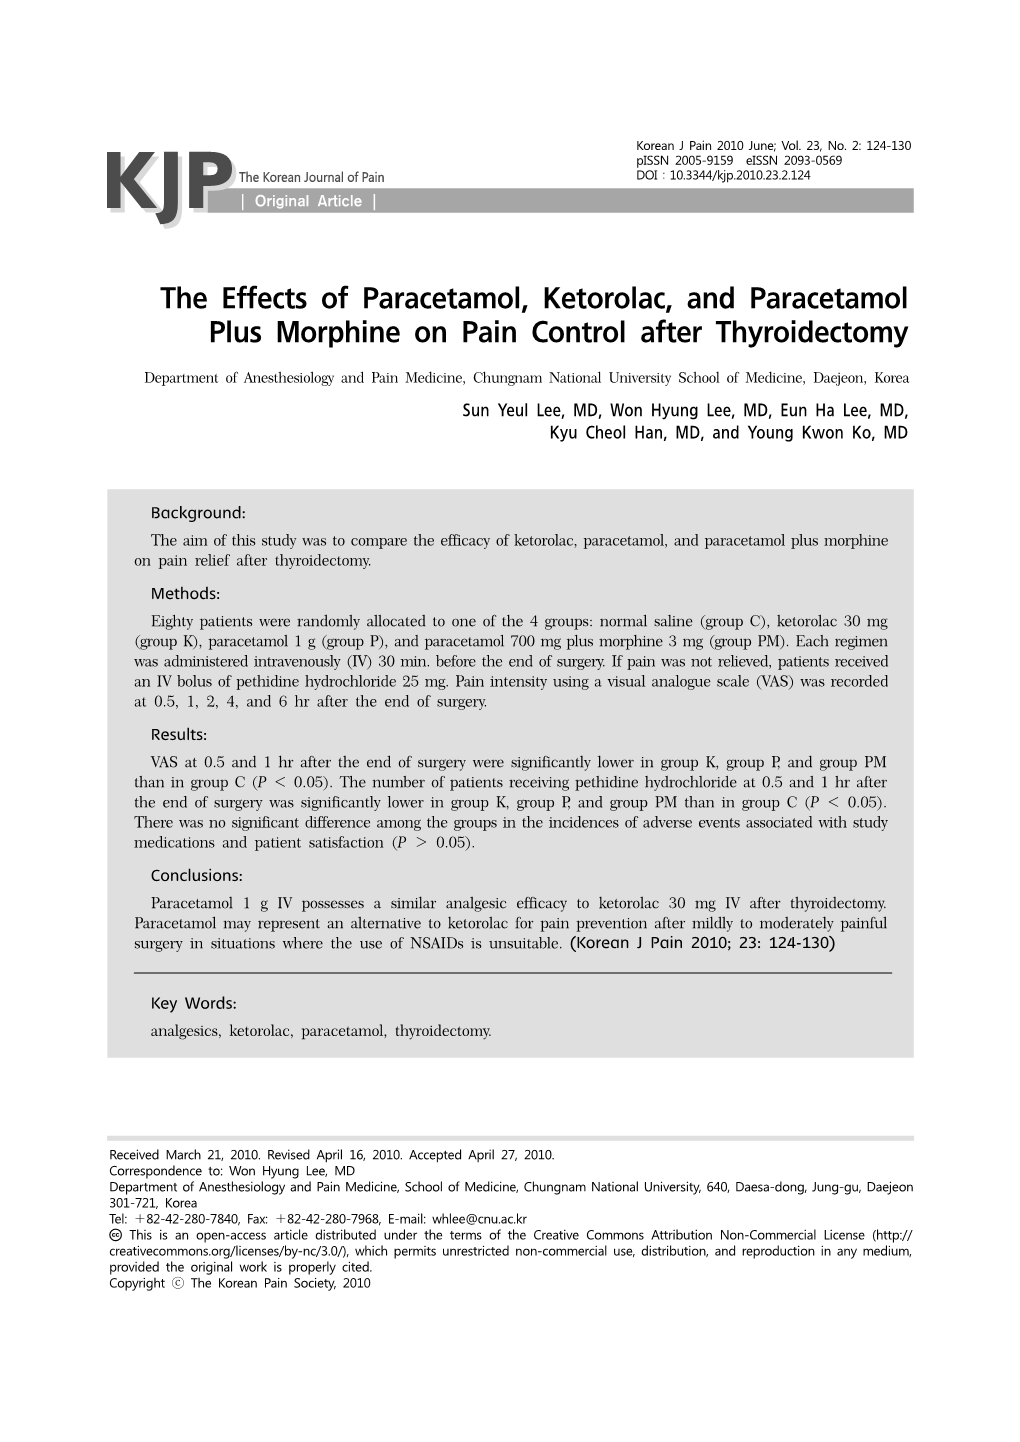 The Effects of Paracetamol, Ketorolac, and Paracetamol Plus Morphine on Pain Control After Thyroidectomy